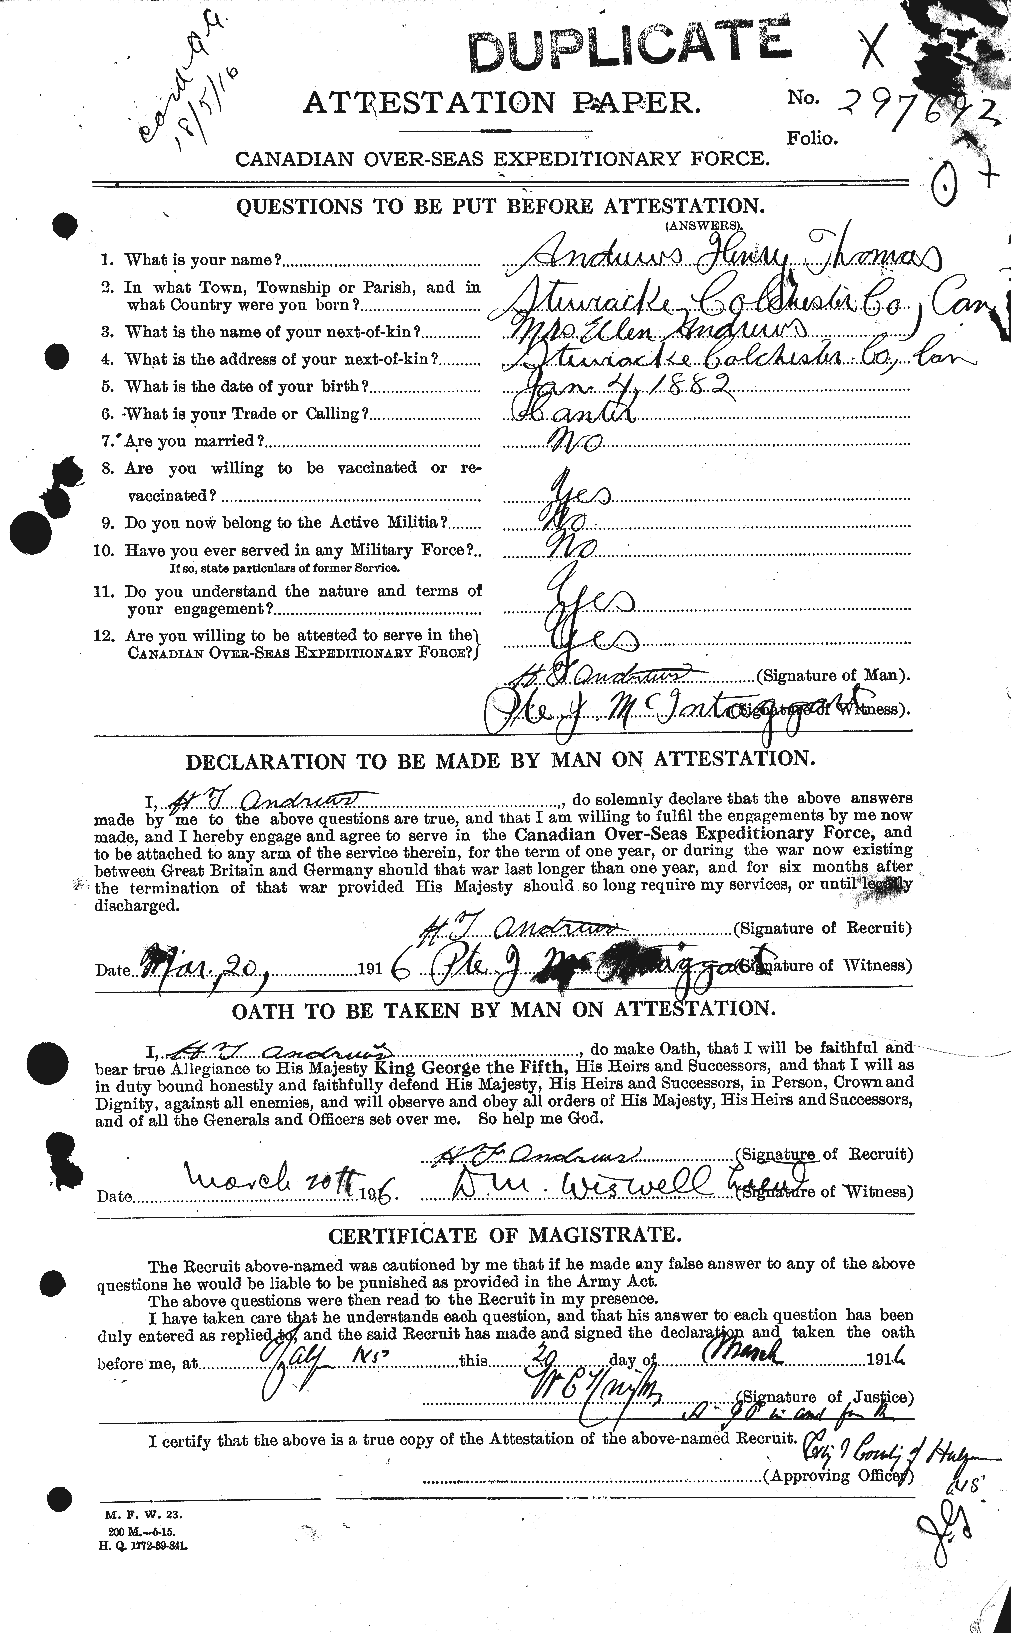 Personnel Records of the First World War - CEF 210265a